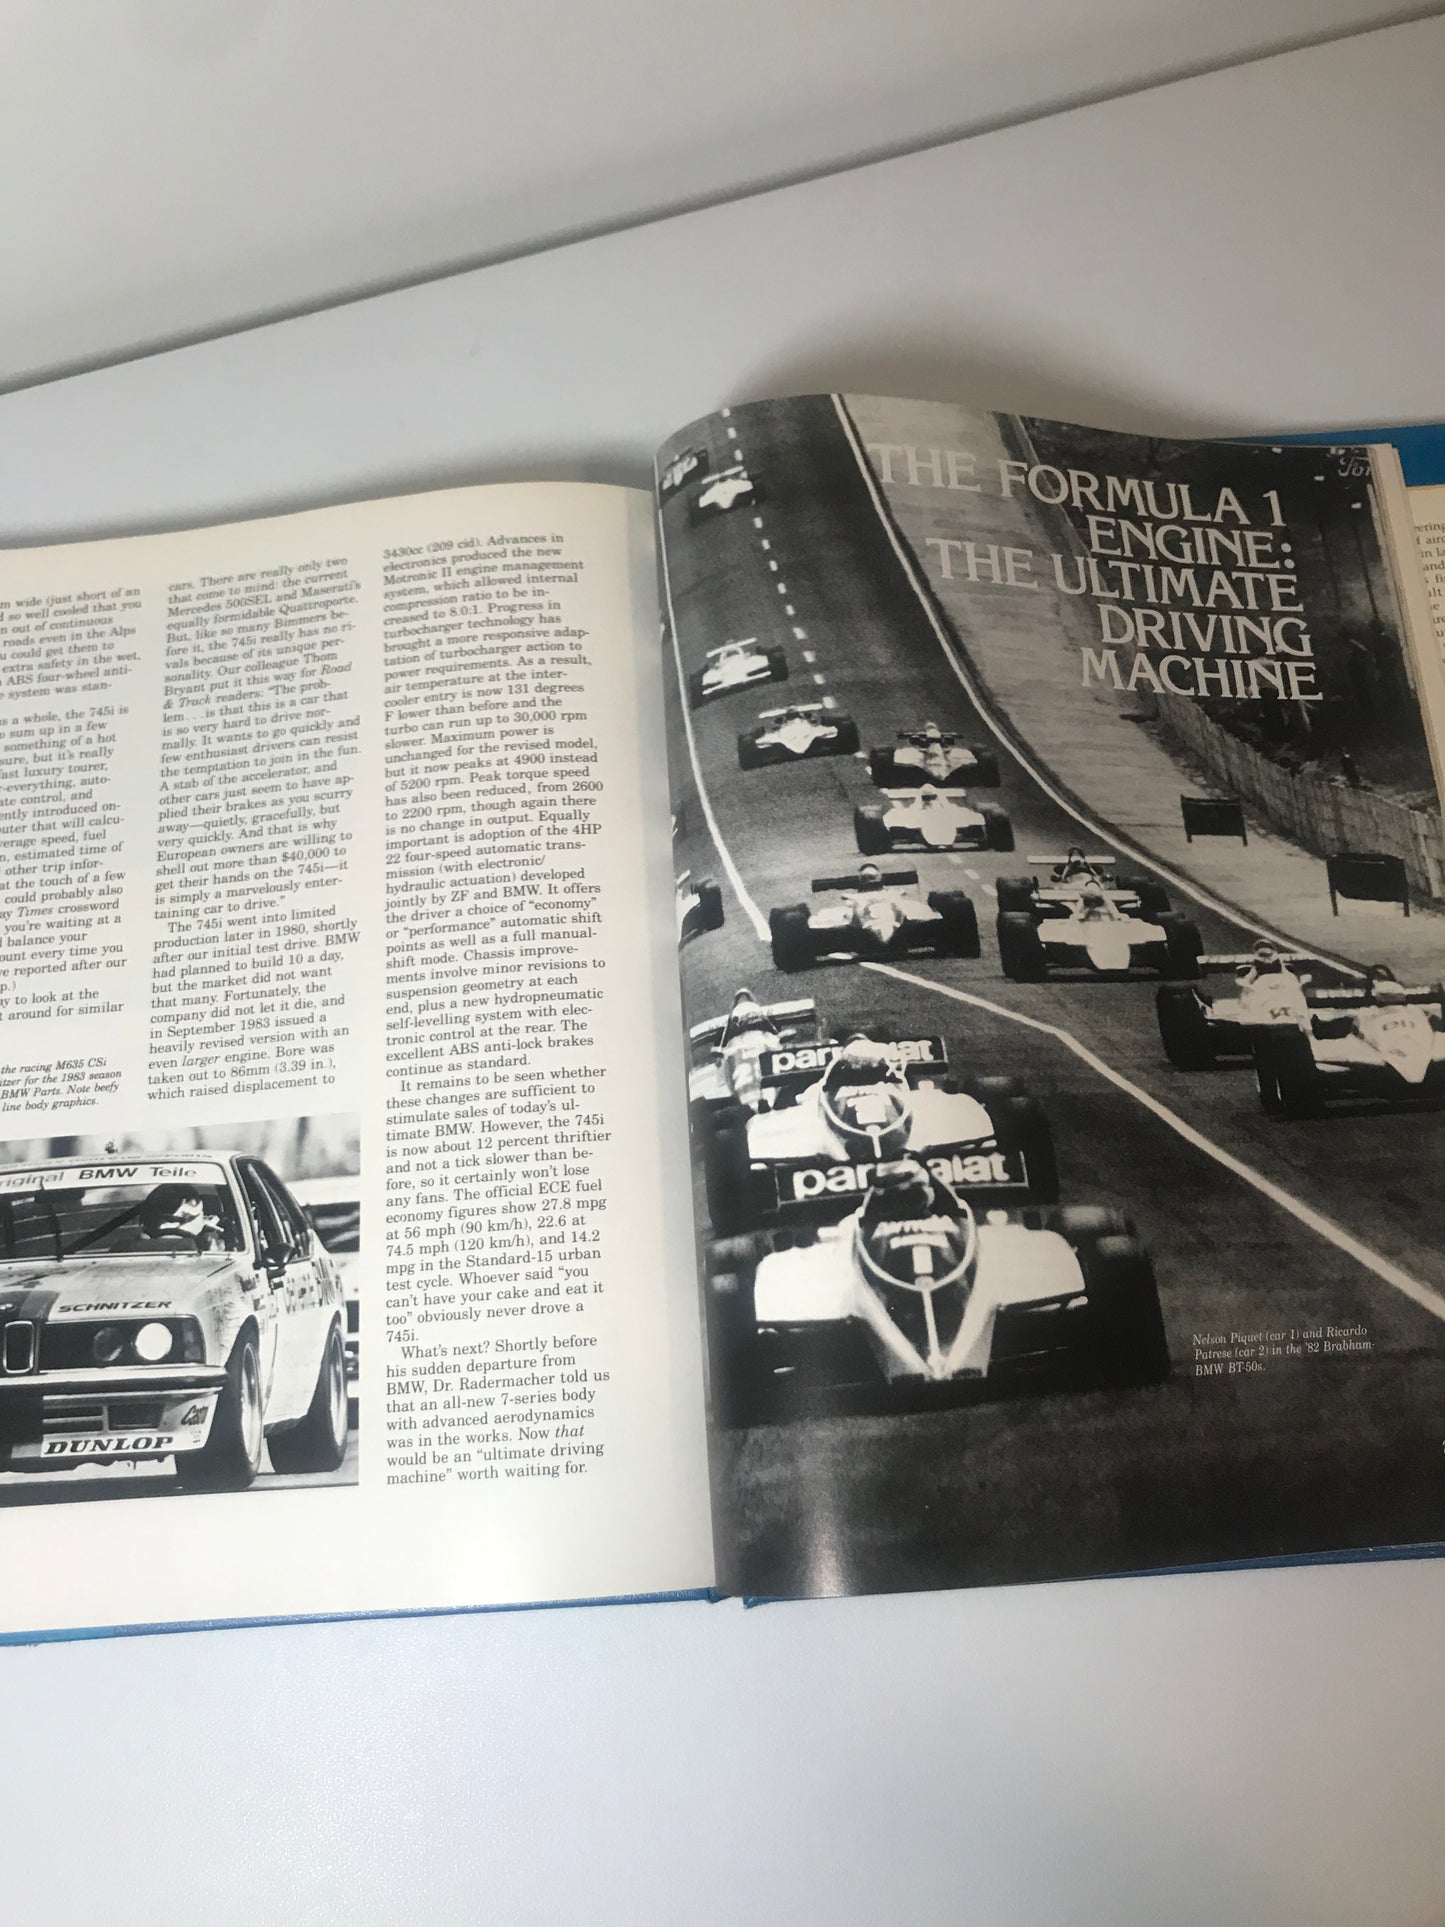 Vintage 1980s BMW Coffee Table Book